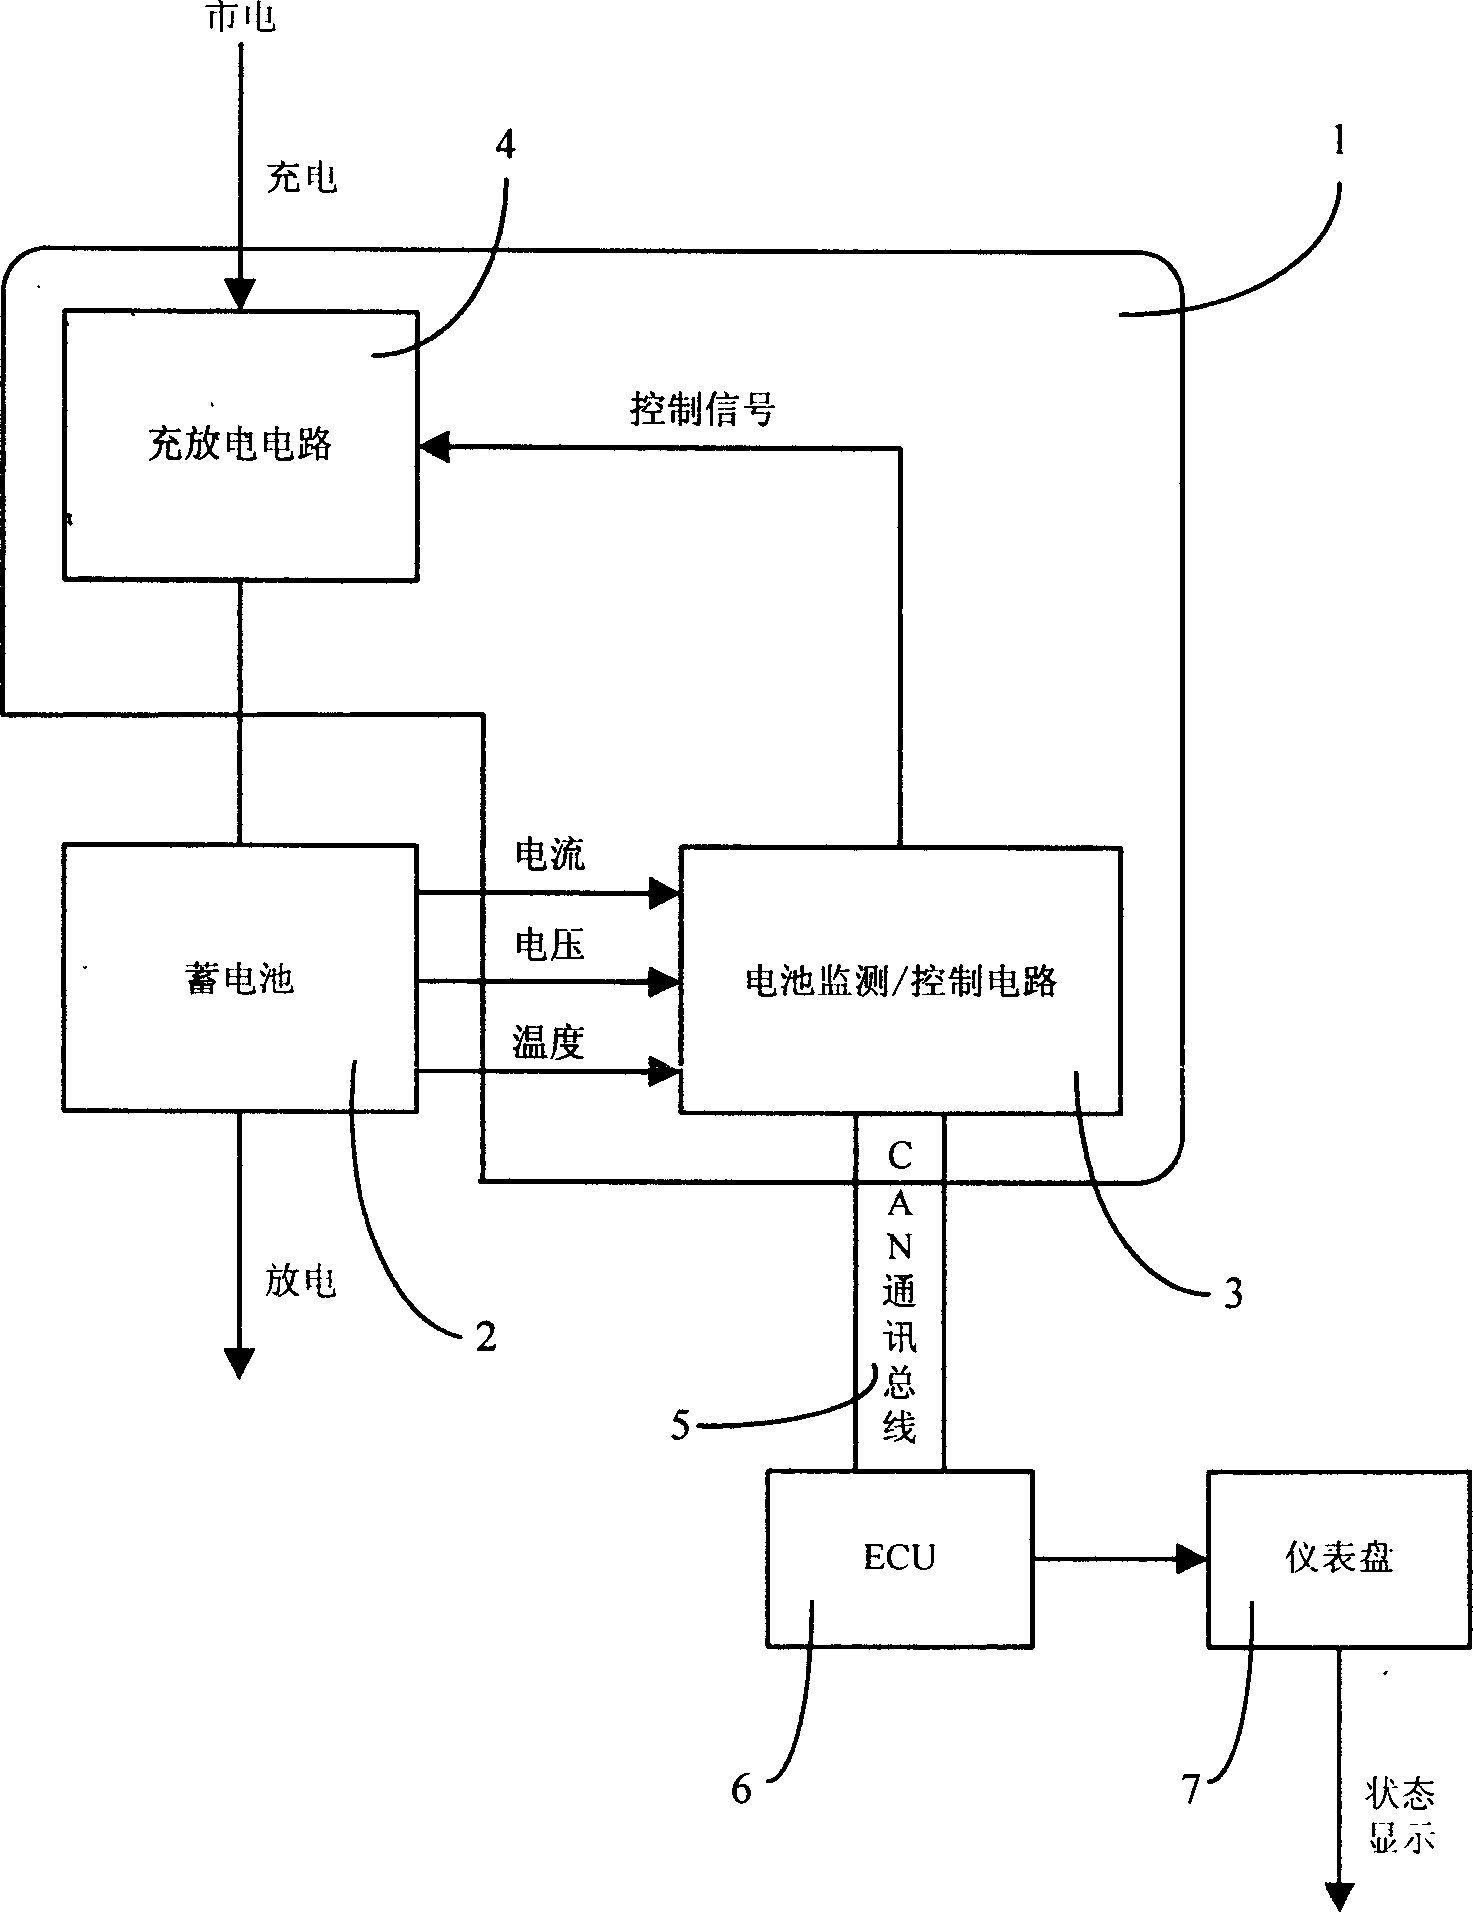 Dynamic power supply managment system for electric vehicle